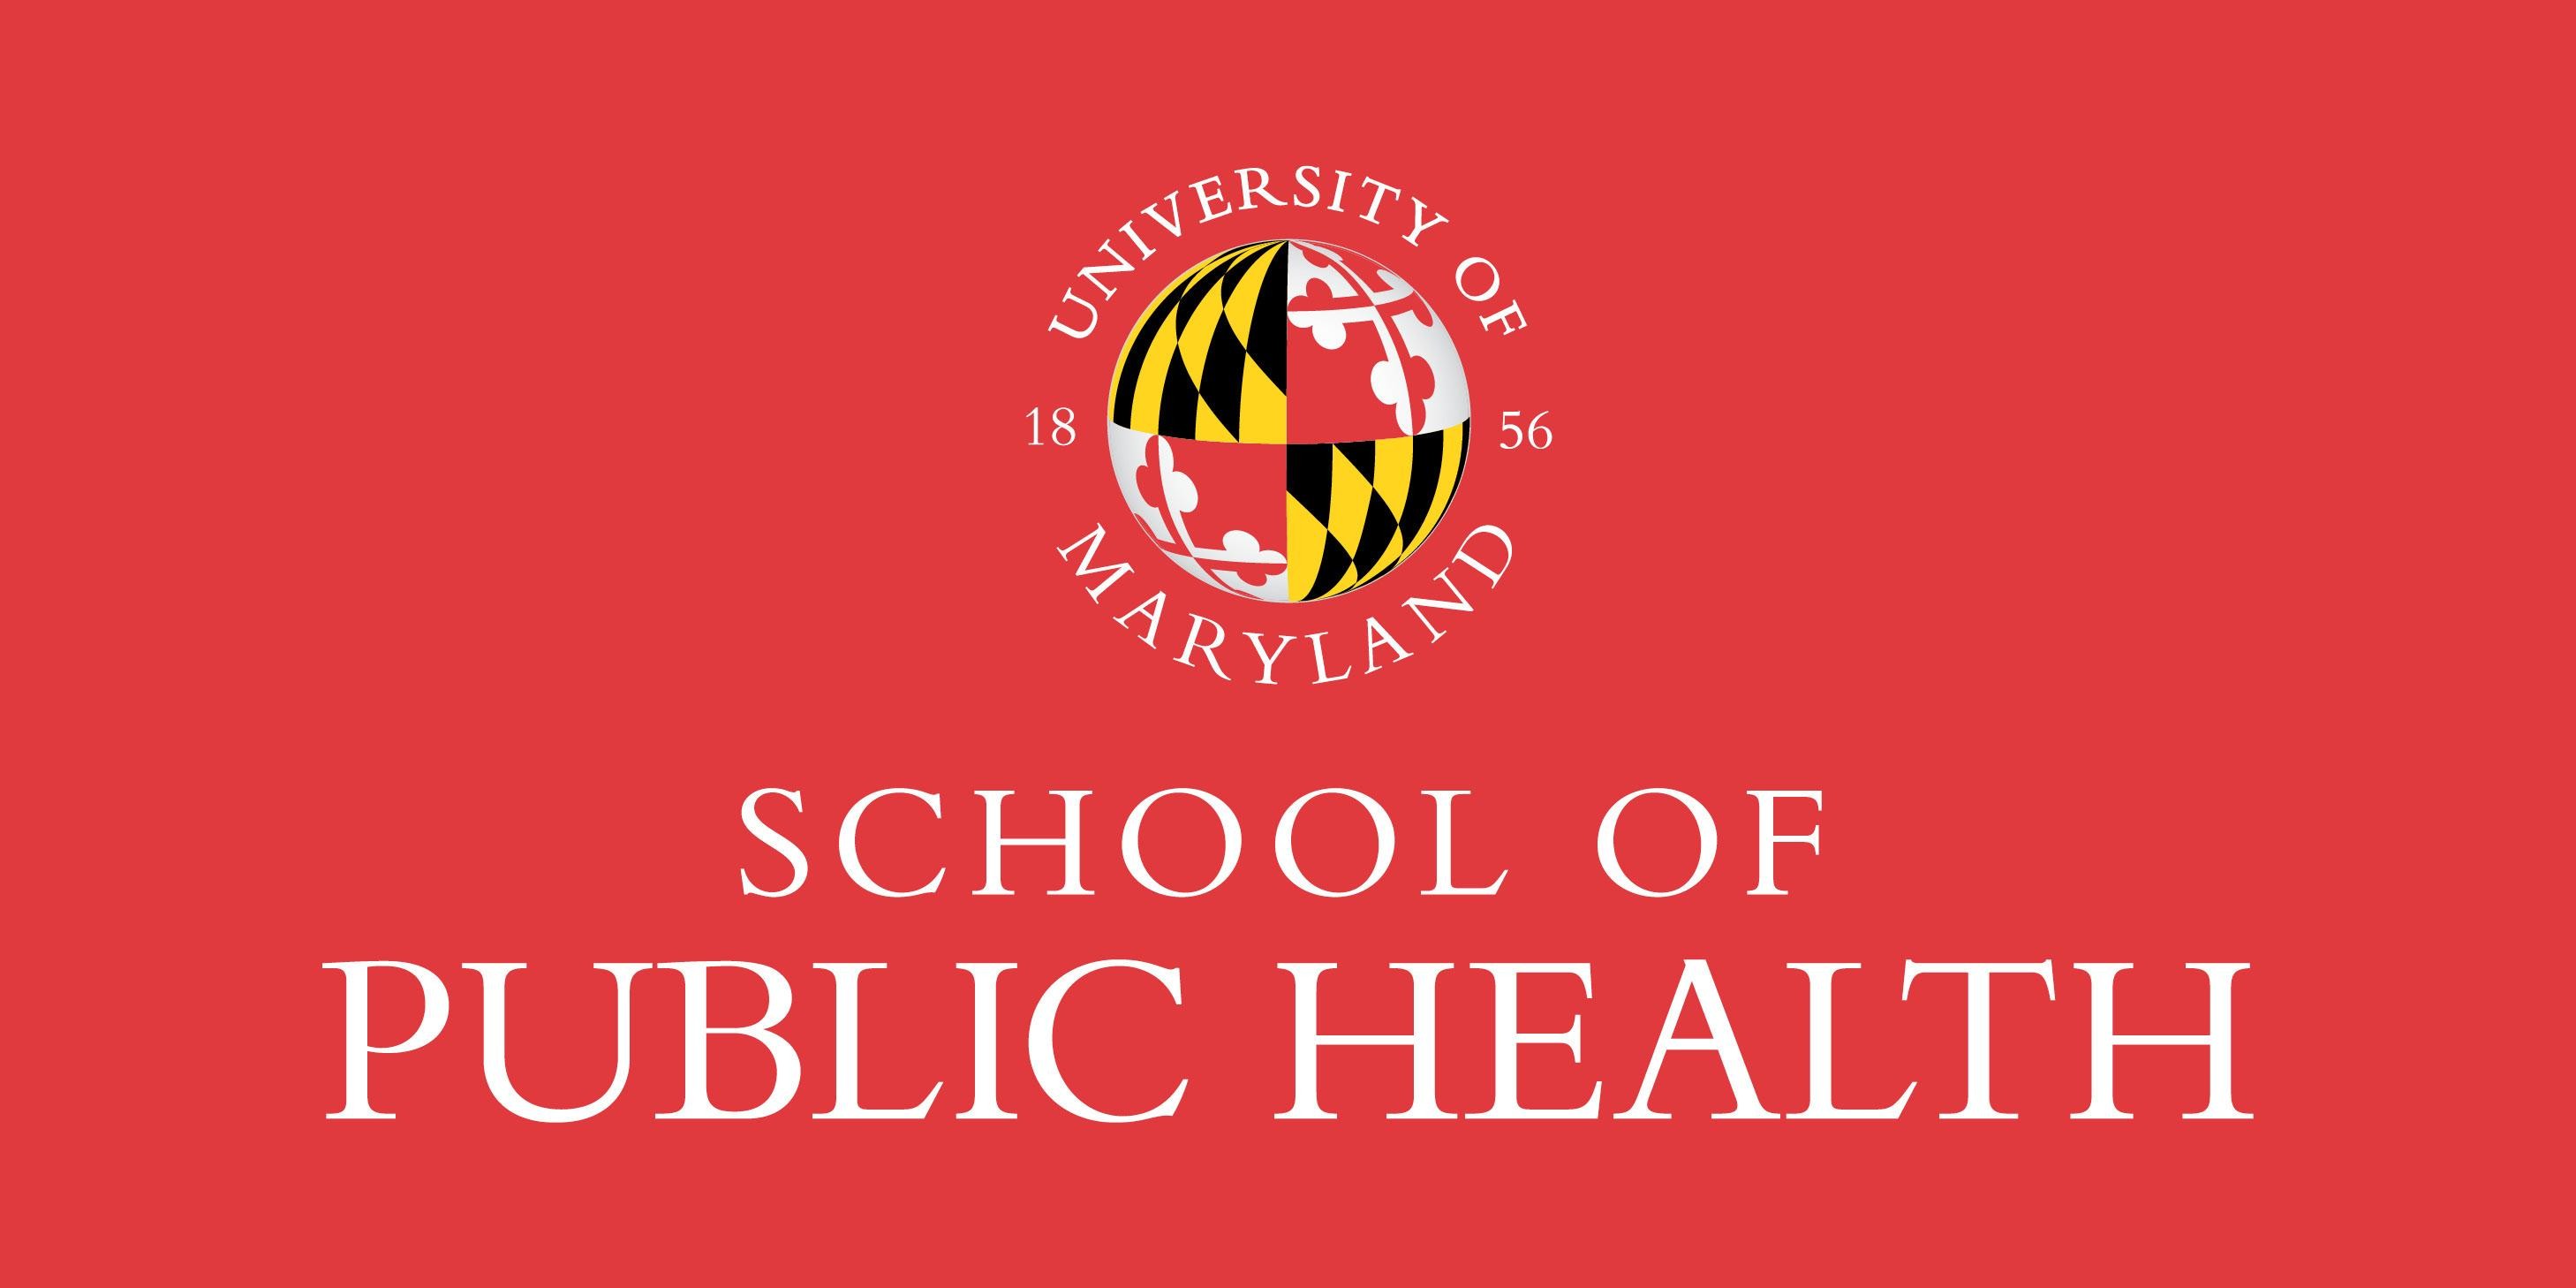 Tuition and Aid | University of Maryland | School of Public Health